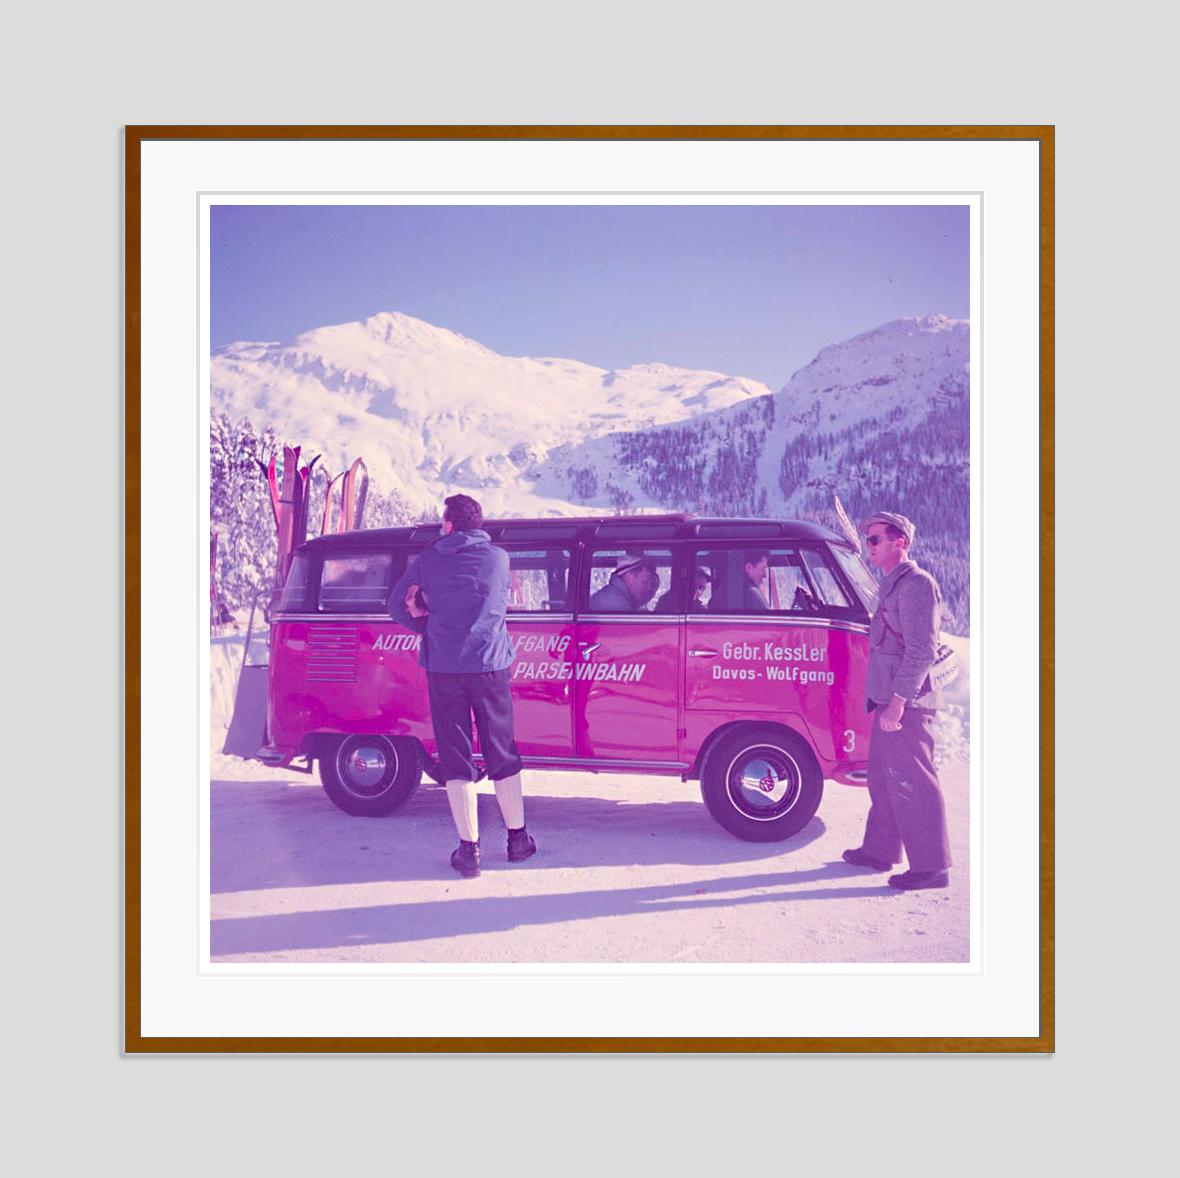 Ski Bus

1951

Skiers take a lift in a VW camper van, Klosters, Switzerland, 1951.

by Toni Frissell

30 x 30